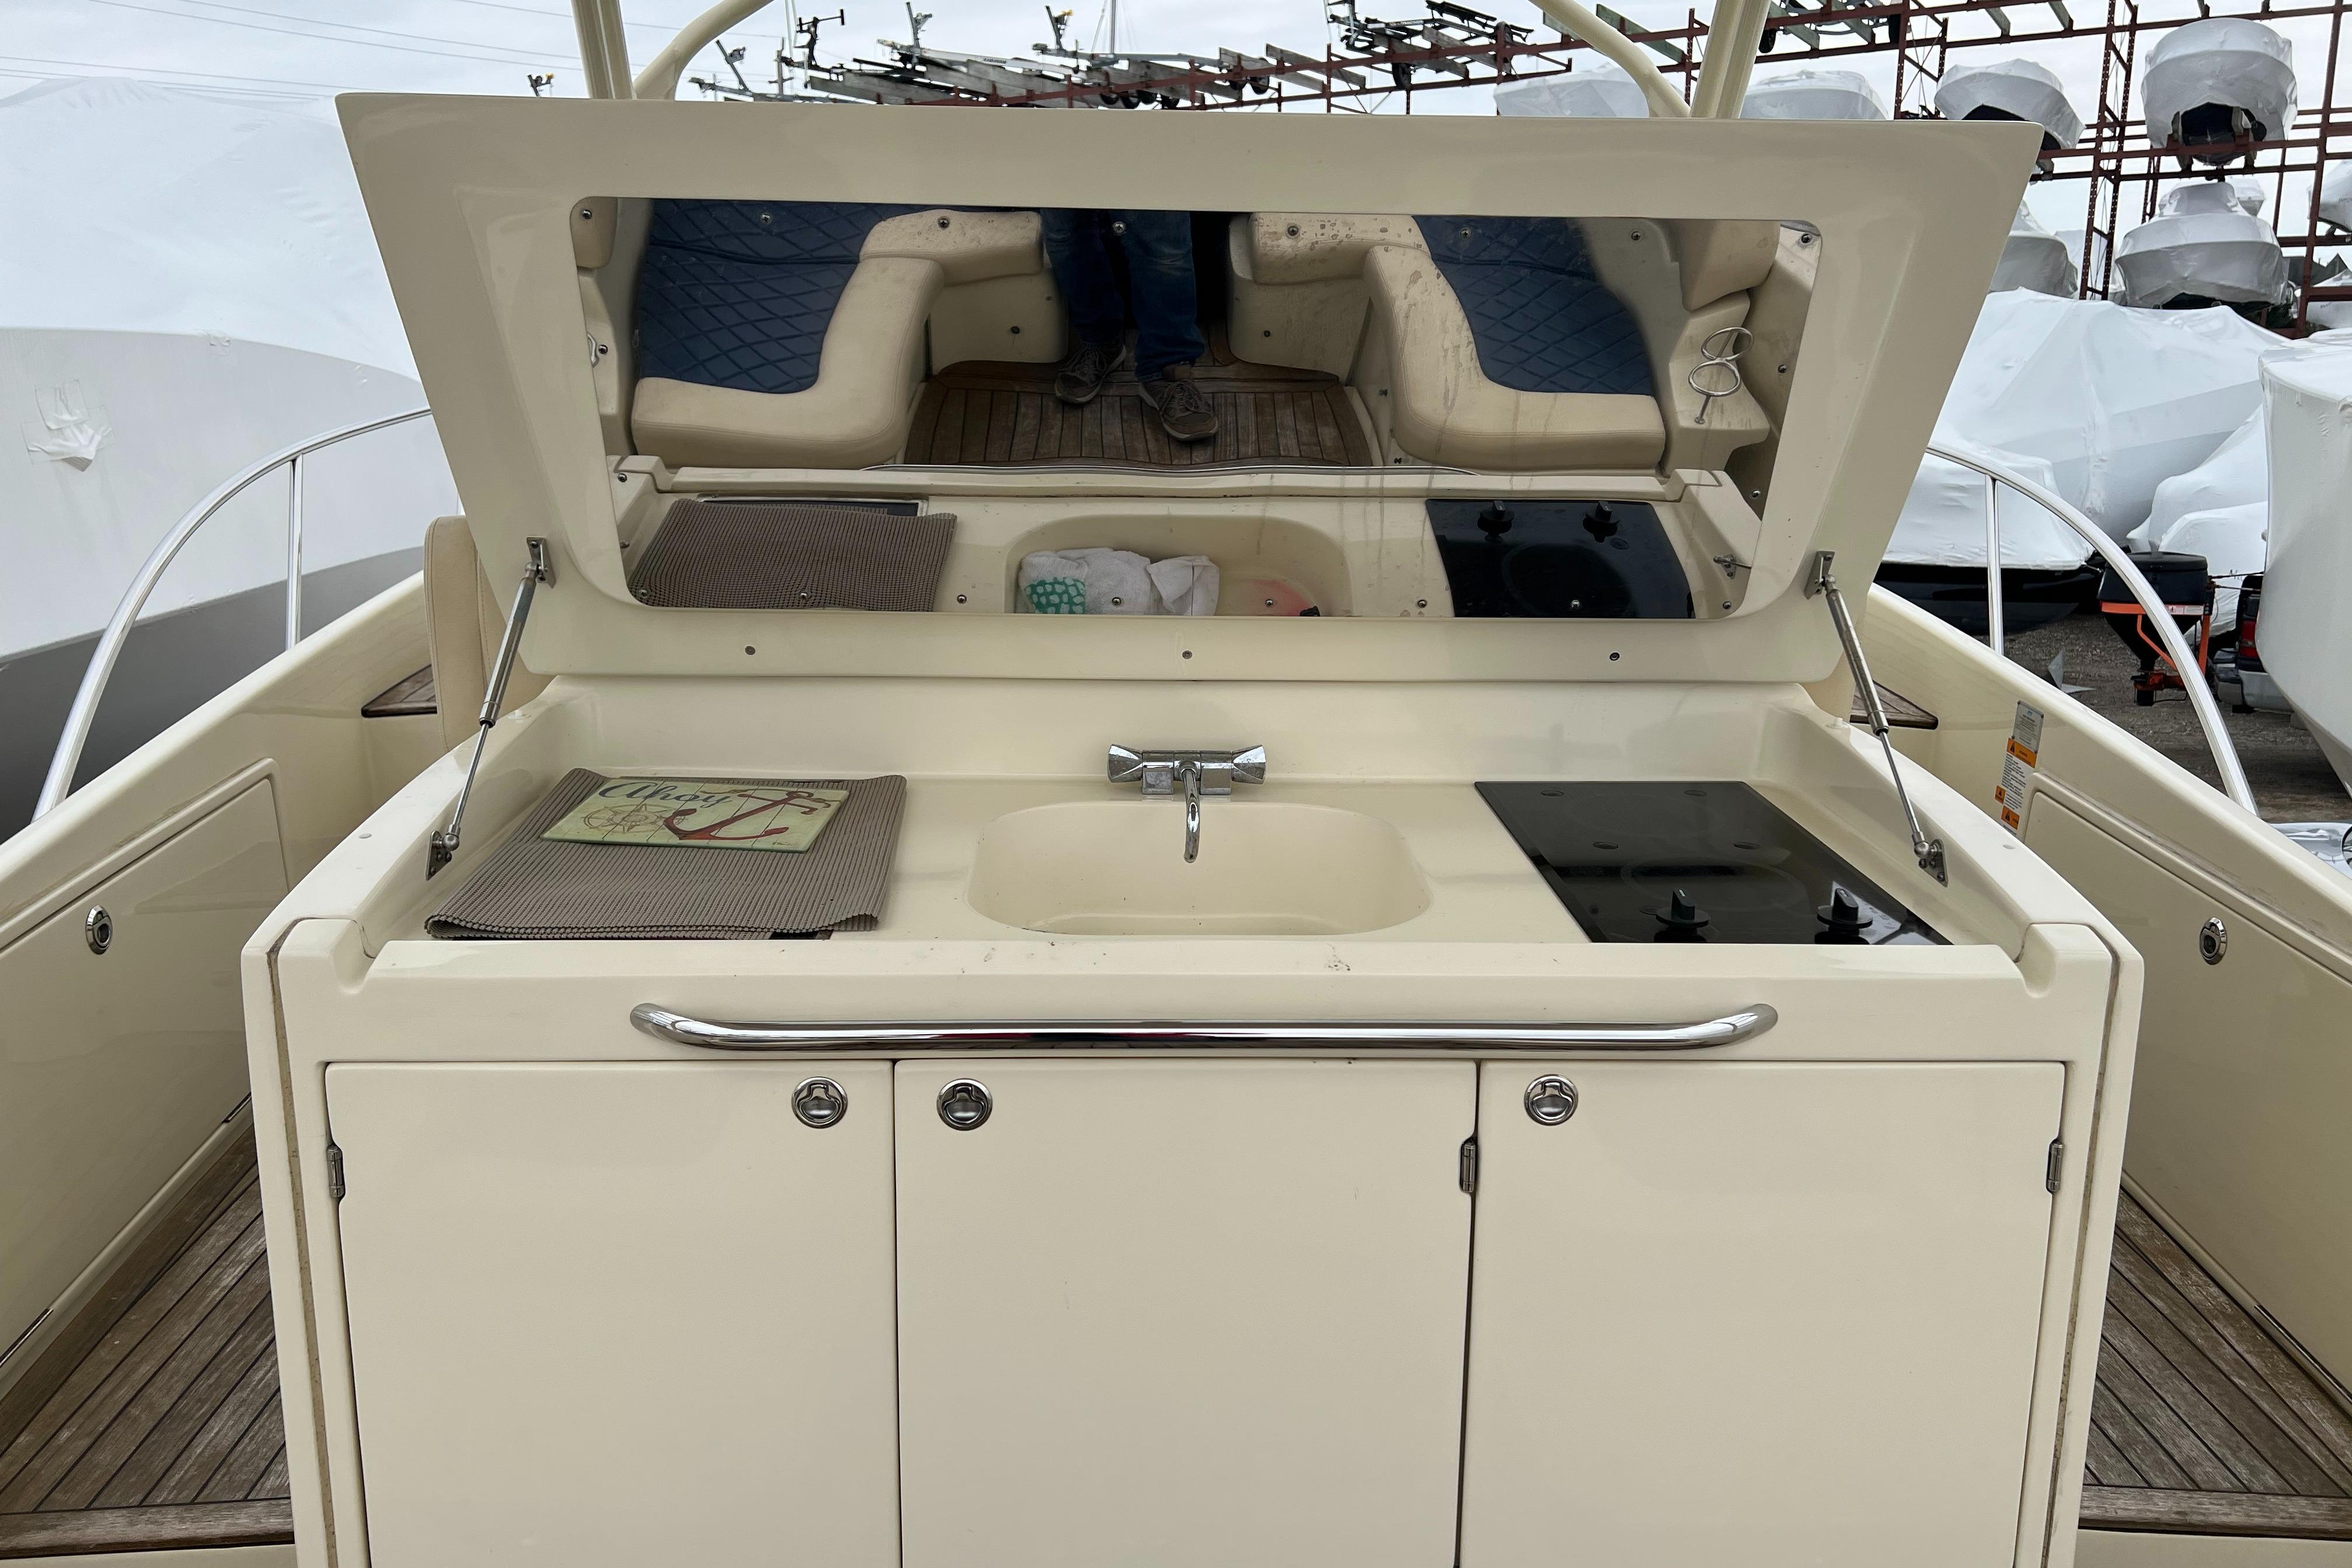 The McGuire Group LLC - Auction: 176: Chris Craft Boat, BMW